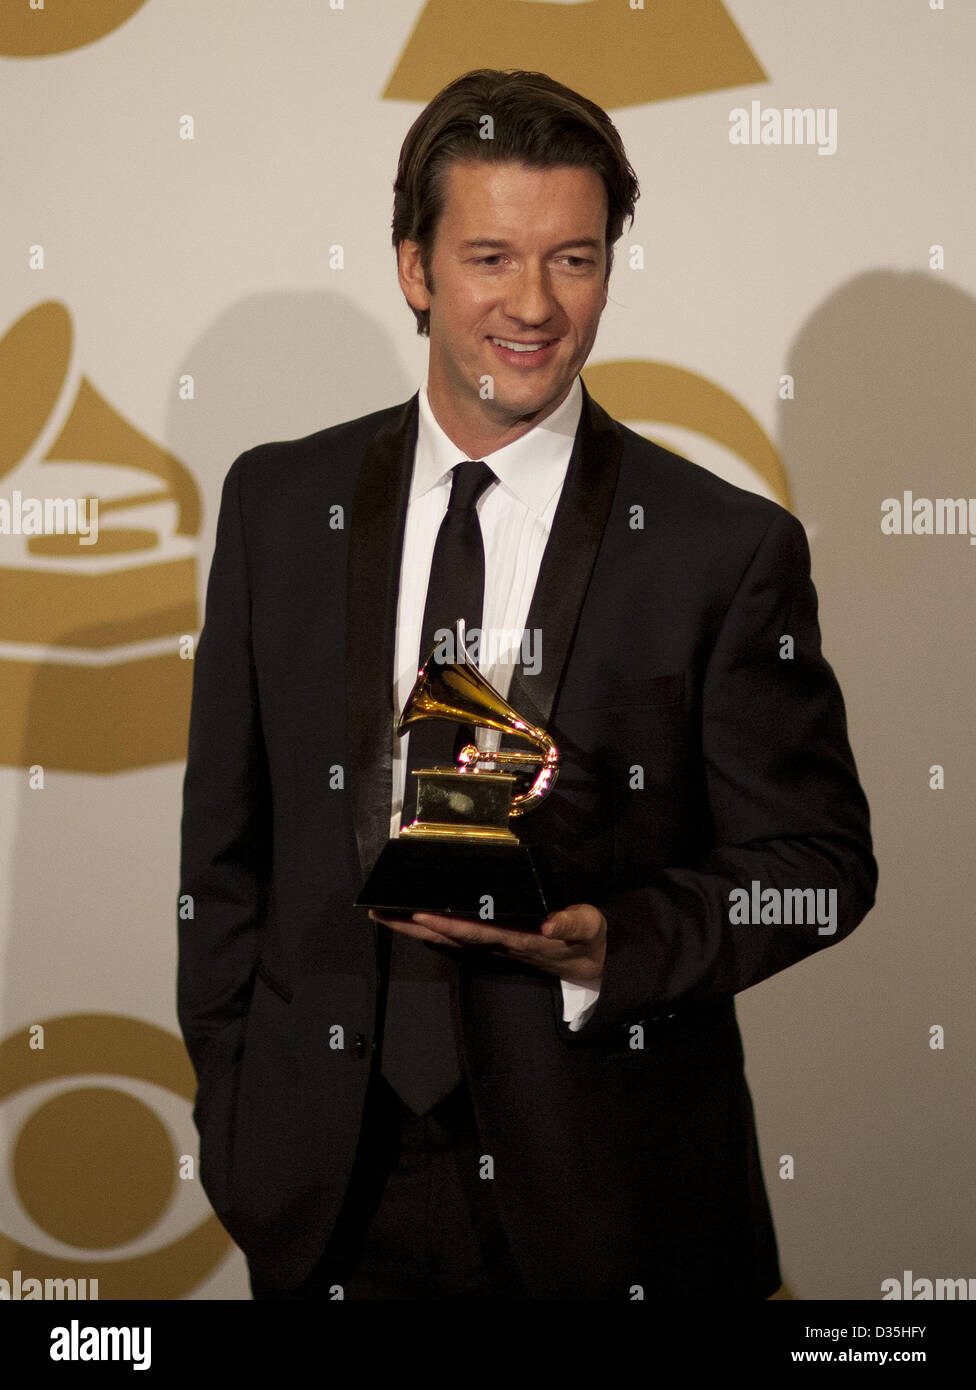 Feb. 10, 2013 - Los Angelles, California, USA - Fritz Klackte, art director Woody At 100: The Woody Guthrie Centennial Collection receives Grammy for Best Boxed or Special Limited Edition Package at the 55th Annual Grammy Awards press room at Staples Center in Los Angeles, California on Sunday February 10, 2013. (Credit Image: © Armando Arorizo/Prensa Internacional/ZUMAPRESS.com) Stock Photo